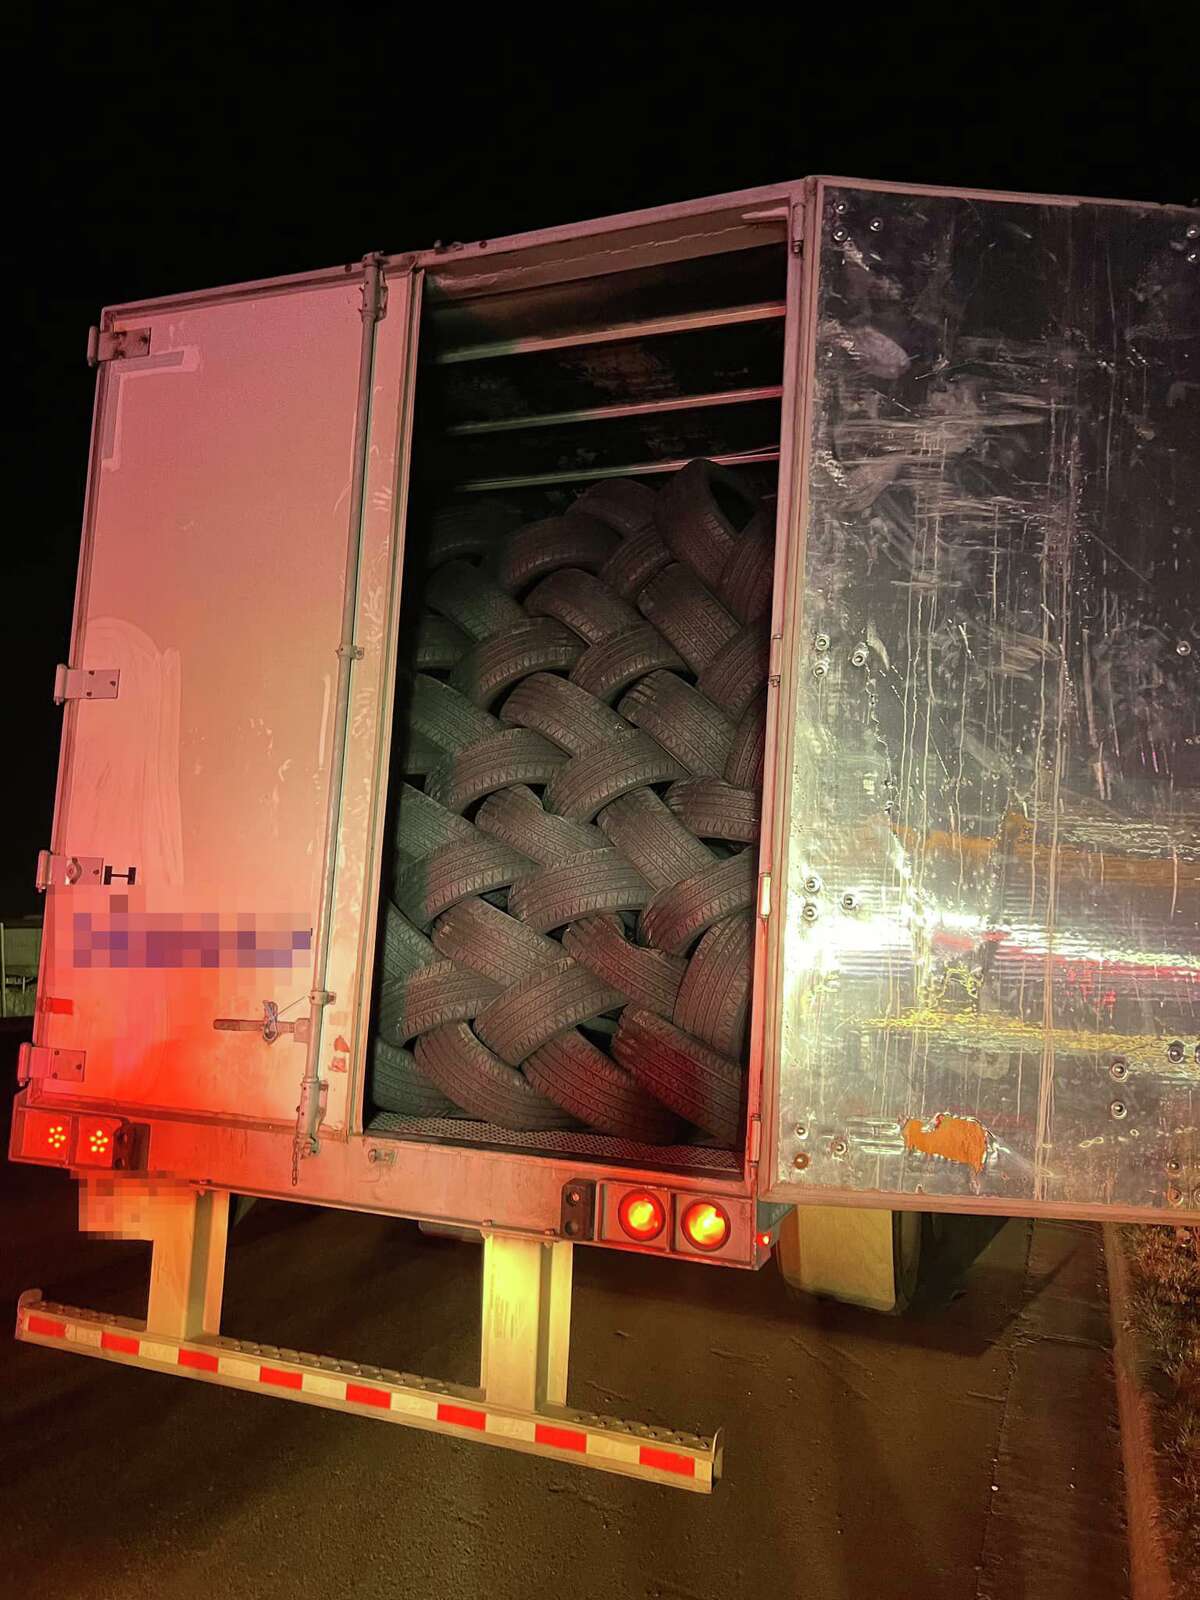 U.S. Border Patrol agents said they discovered 53 migrants inside a trailer transporting spare tires. The smuggling attempt occurred on Feb. 17 at checkpoint on Interstate 35.